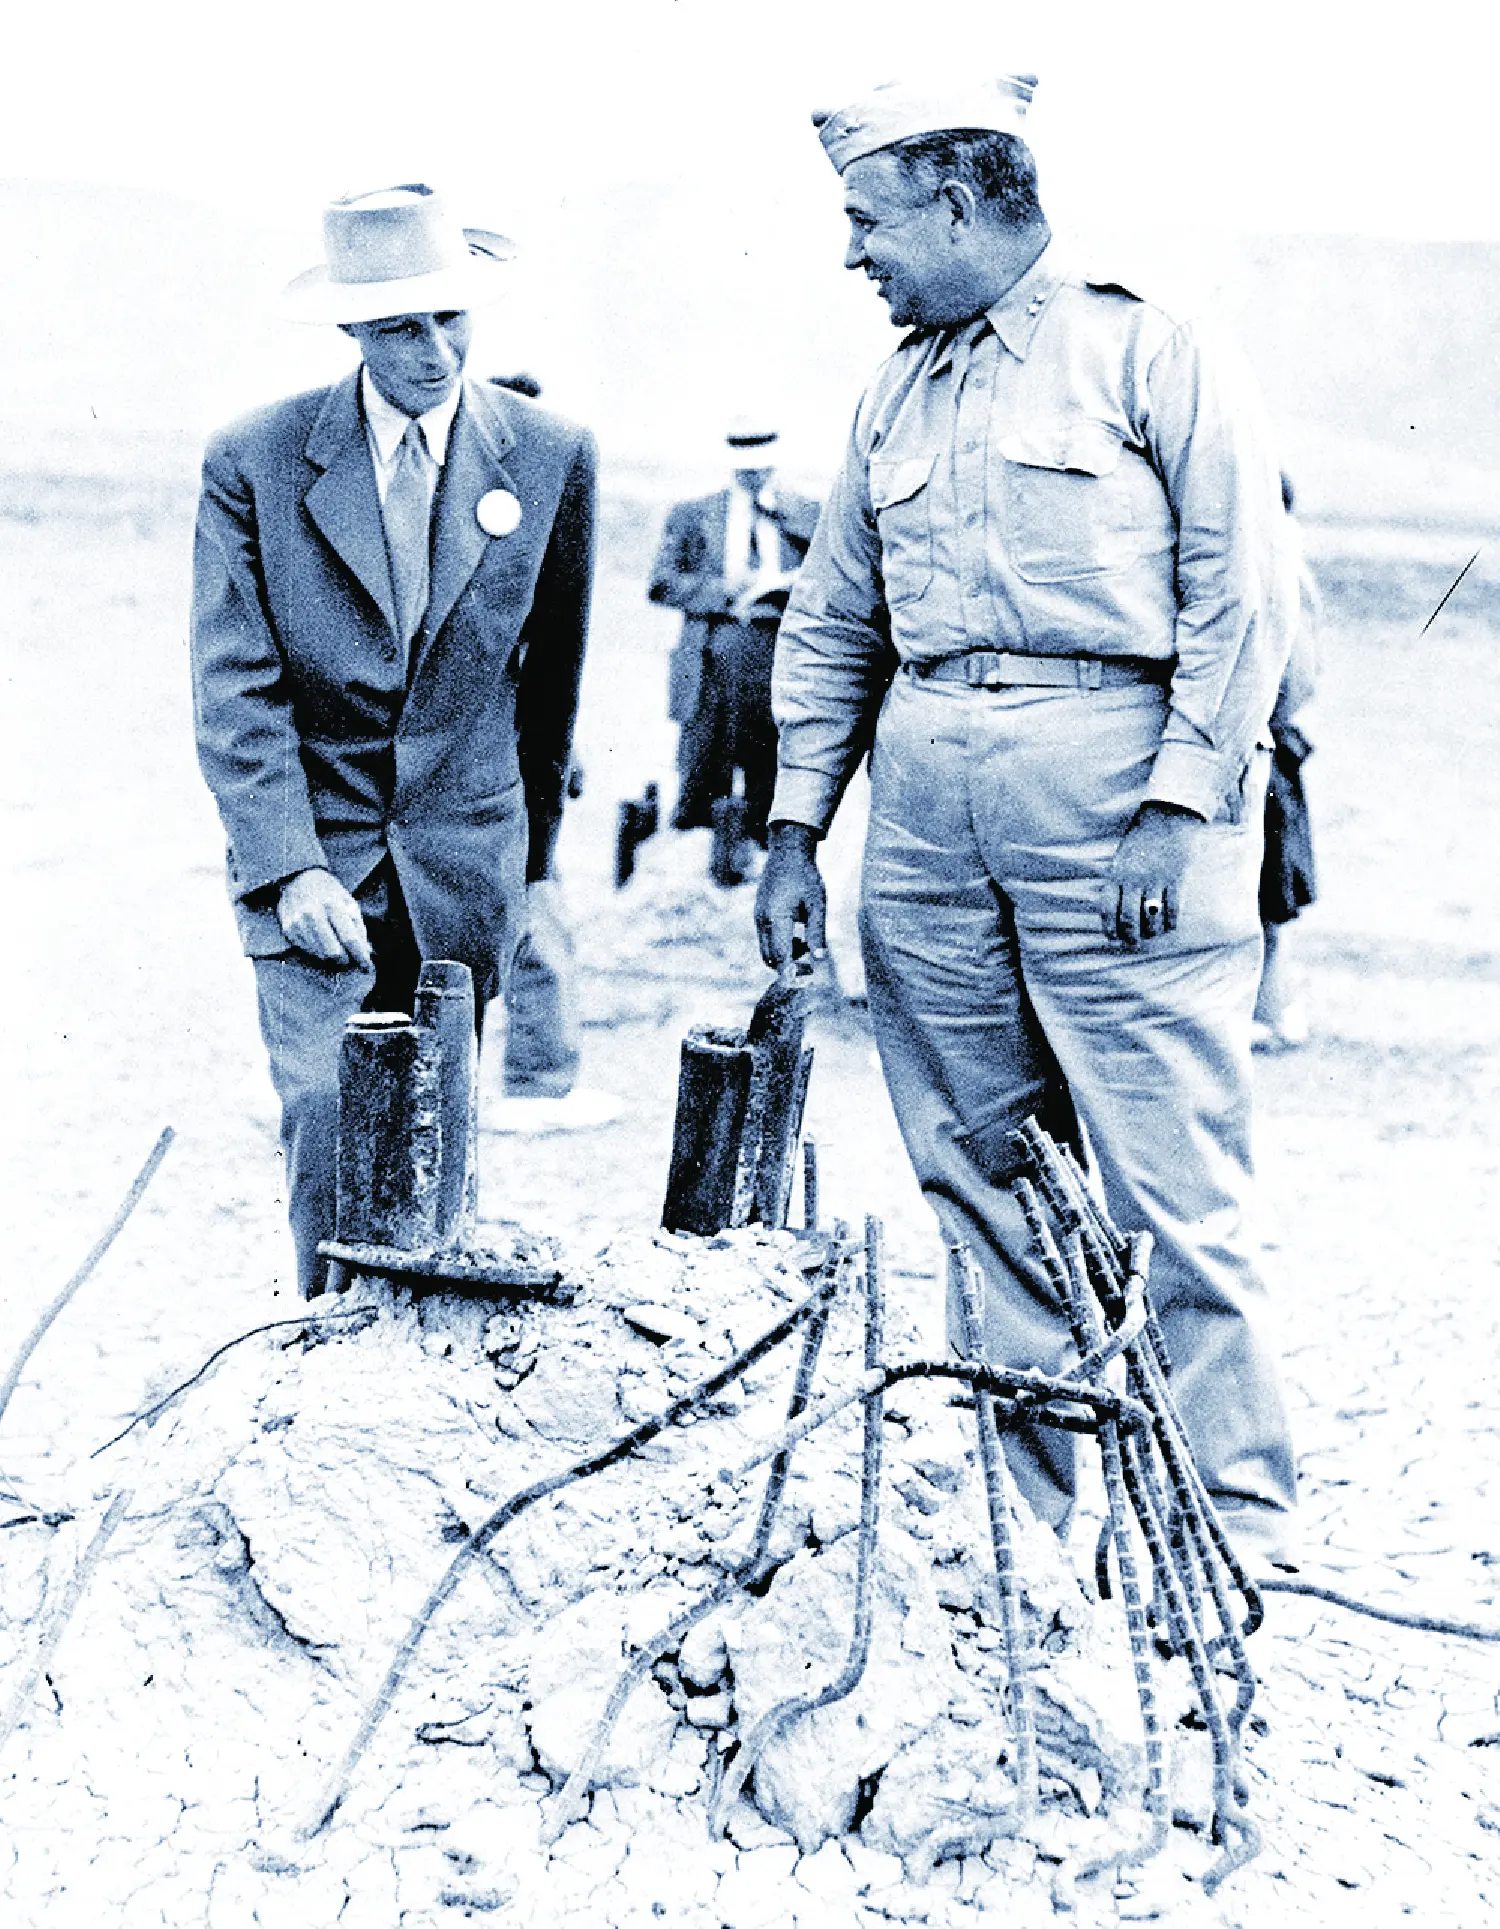 Oppenheimer and Groves inspect the wreckage of the 100-foot steel tower used to drop the nuke.